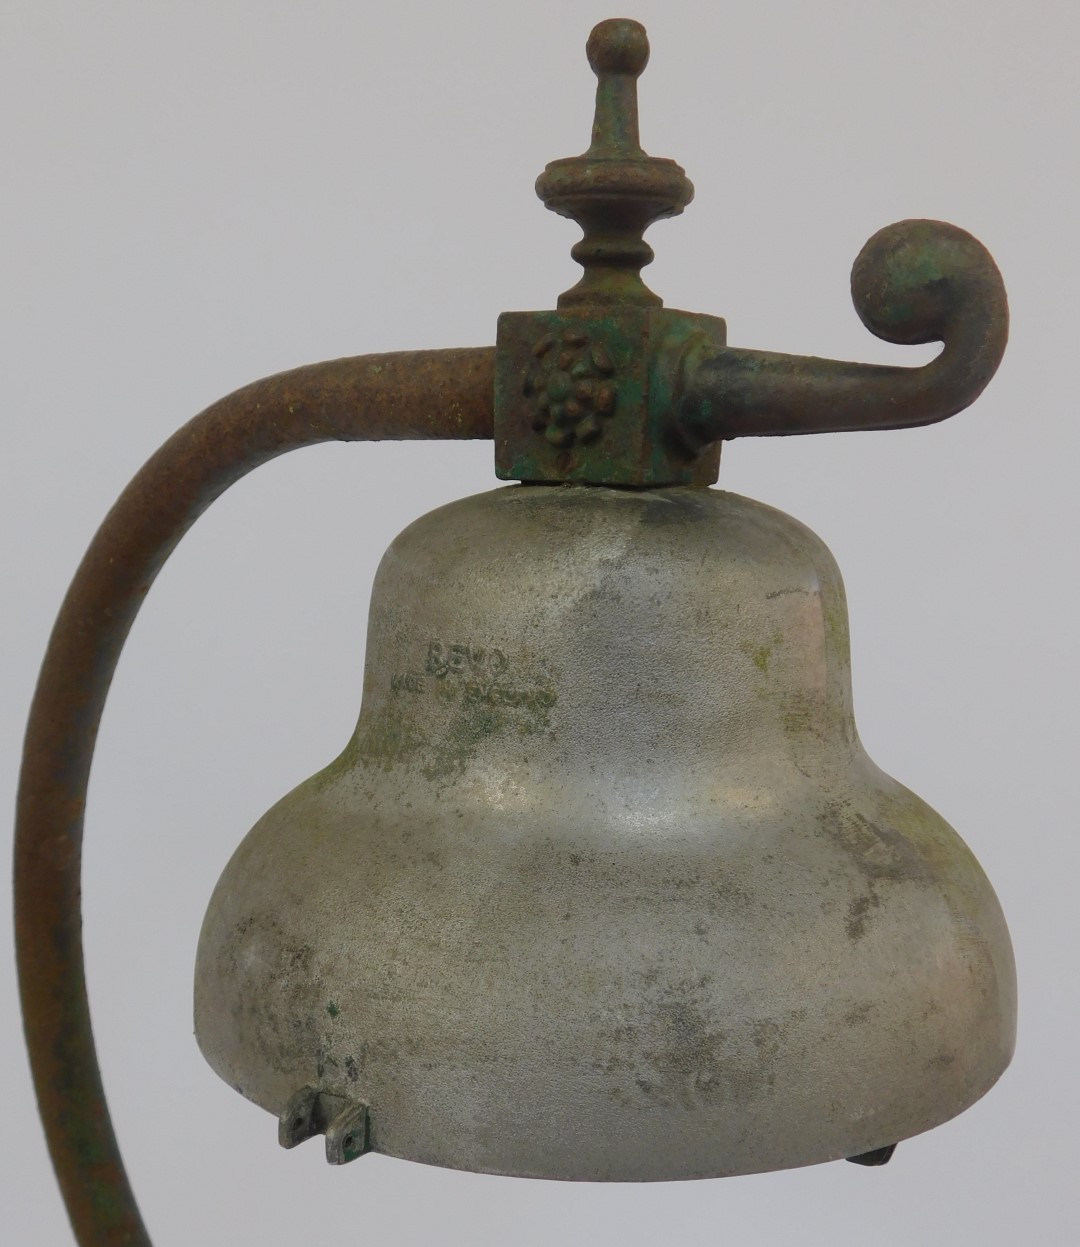 An A C Ford cast iron street light, with Bevo Made in England shade, some green paintwork remaining, - Image 4 of 5